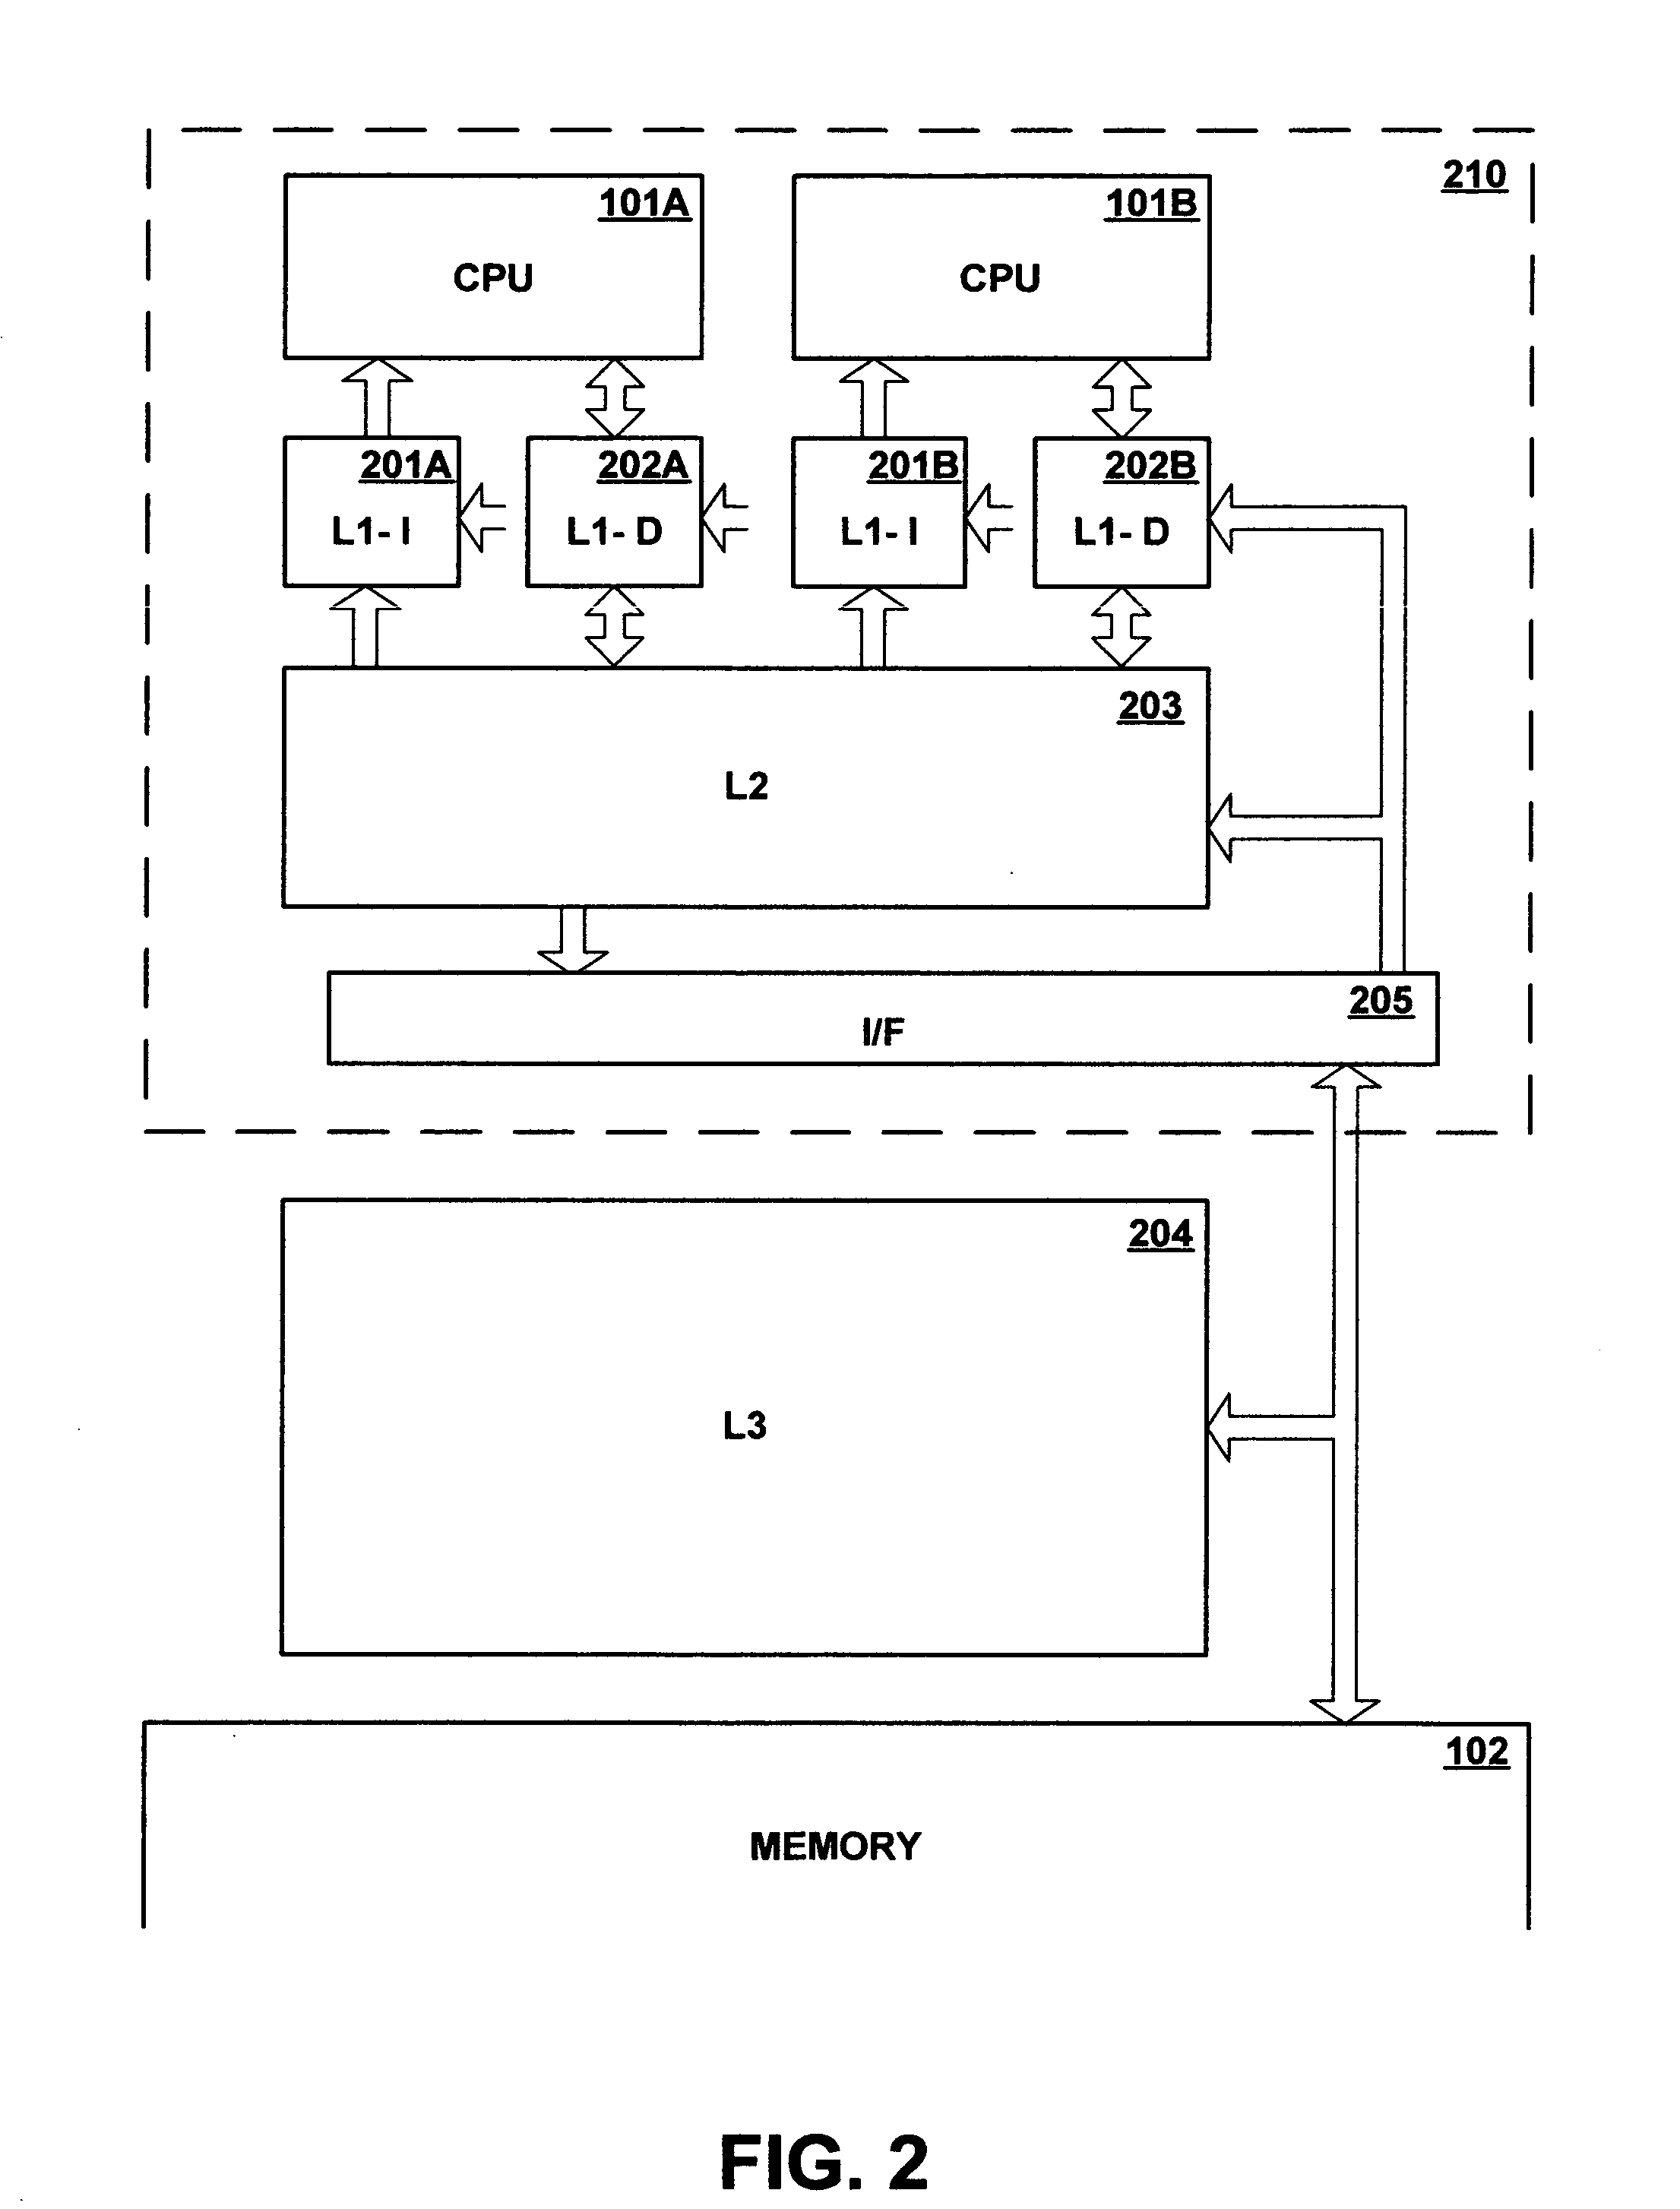 Digital data processing apparatus having asymmetric hardware multithreading support for different threads